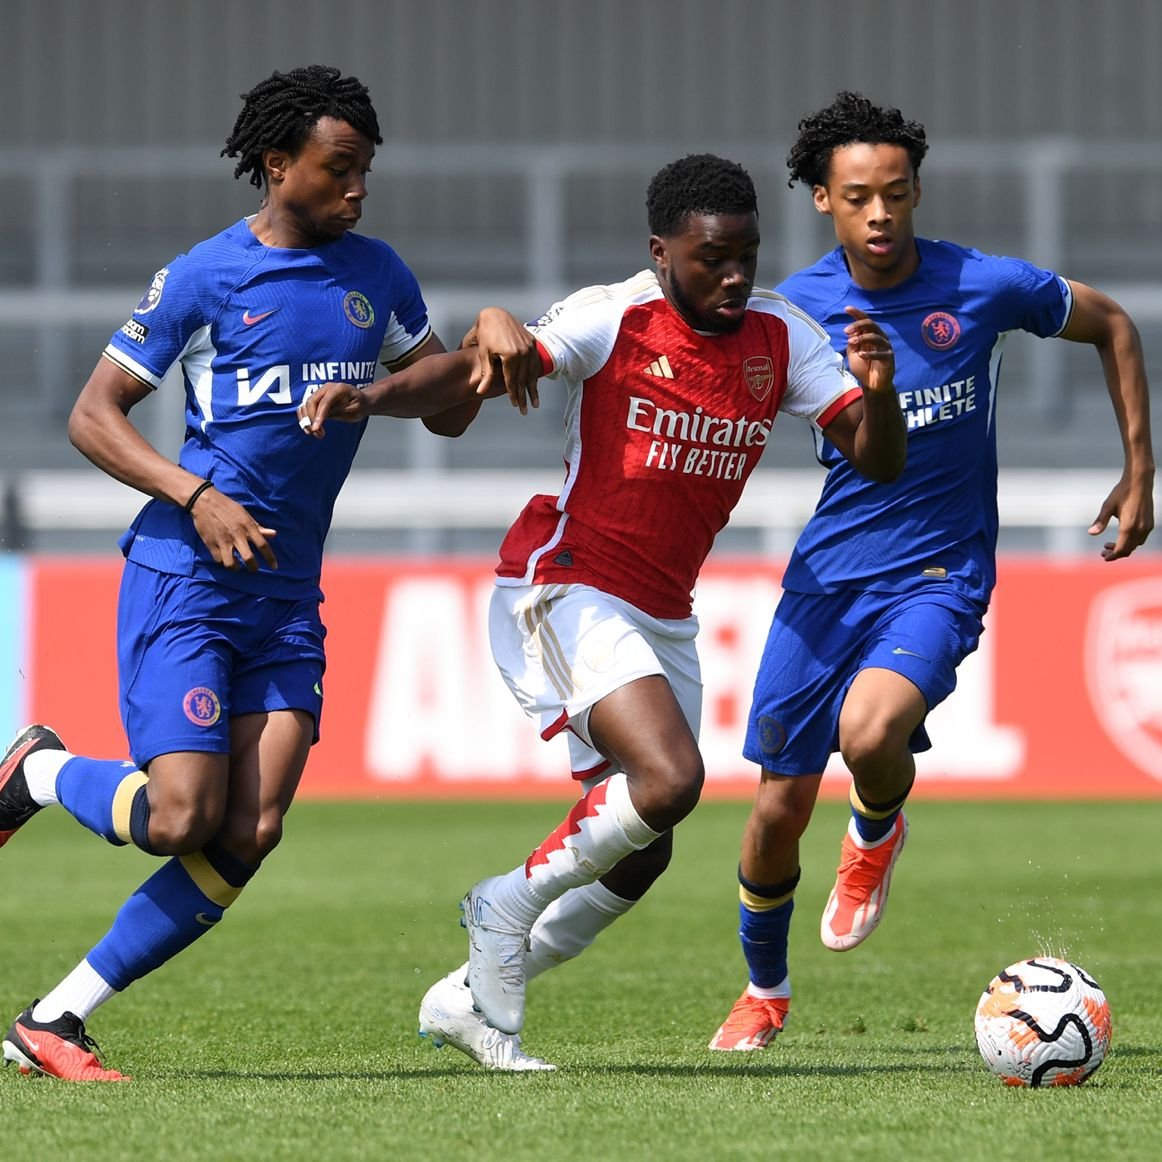 ⏰ We're back underway for the second half... 💪 Let's keep pushing, Gunners 🔴 1-1 🔵 (46) #AFCU21 | #PL2